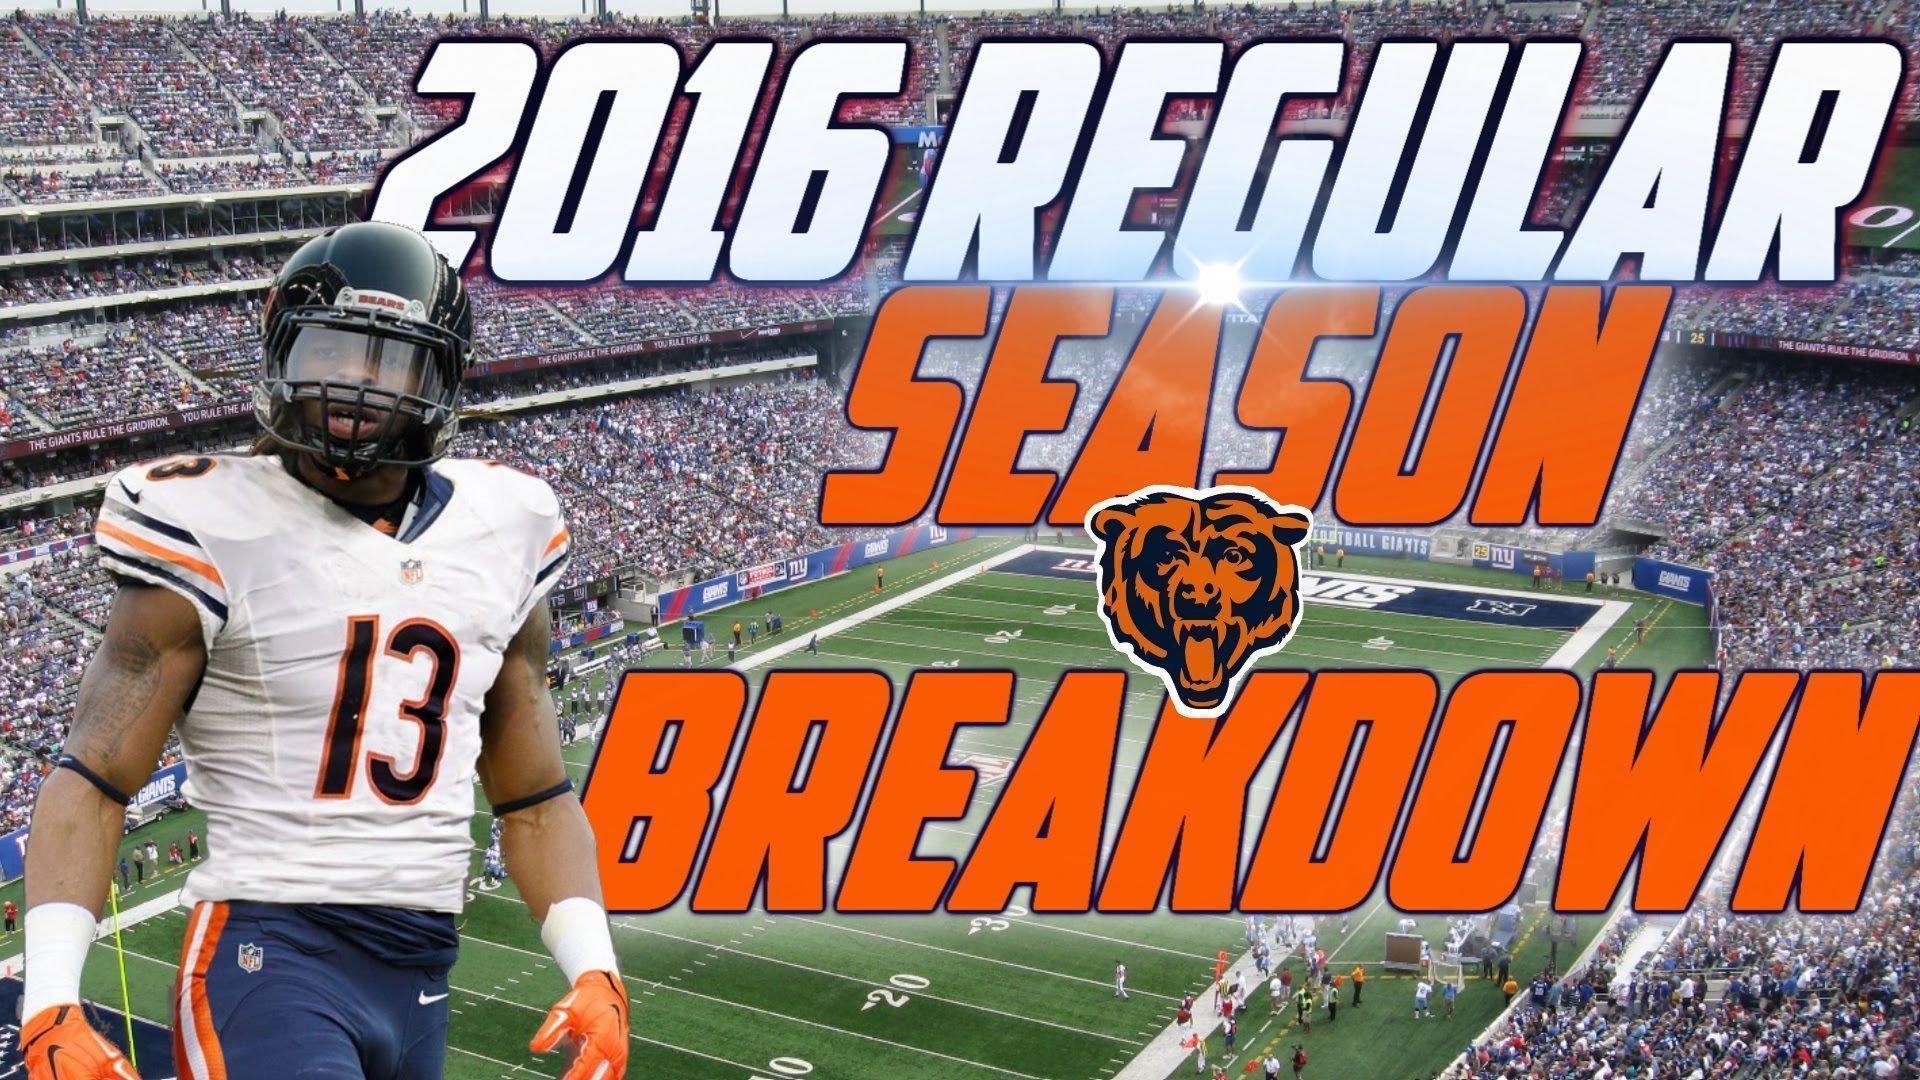 The Chicago Bears 2016 Football Schedule Breakdown and Predictions